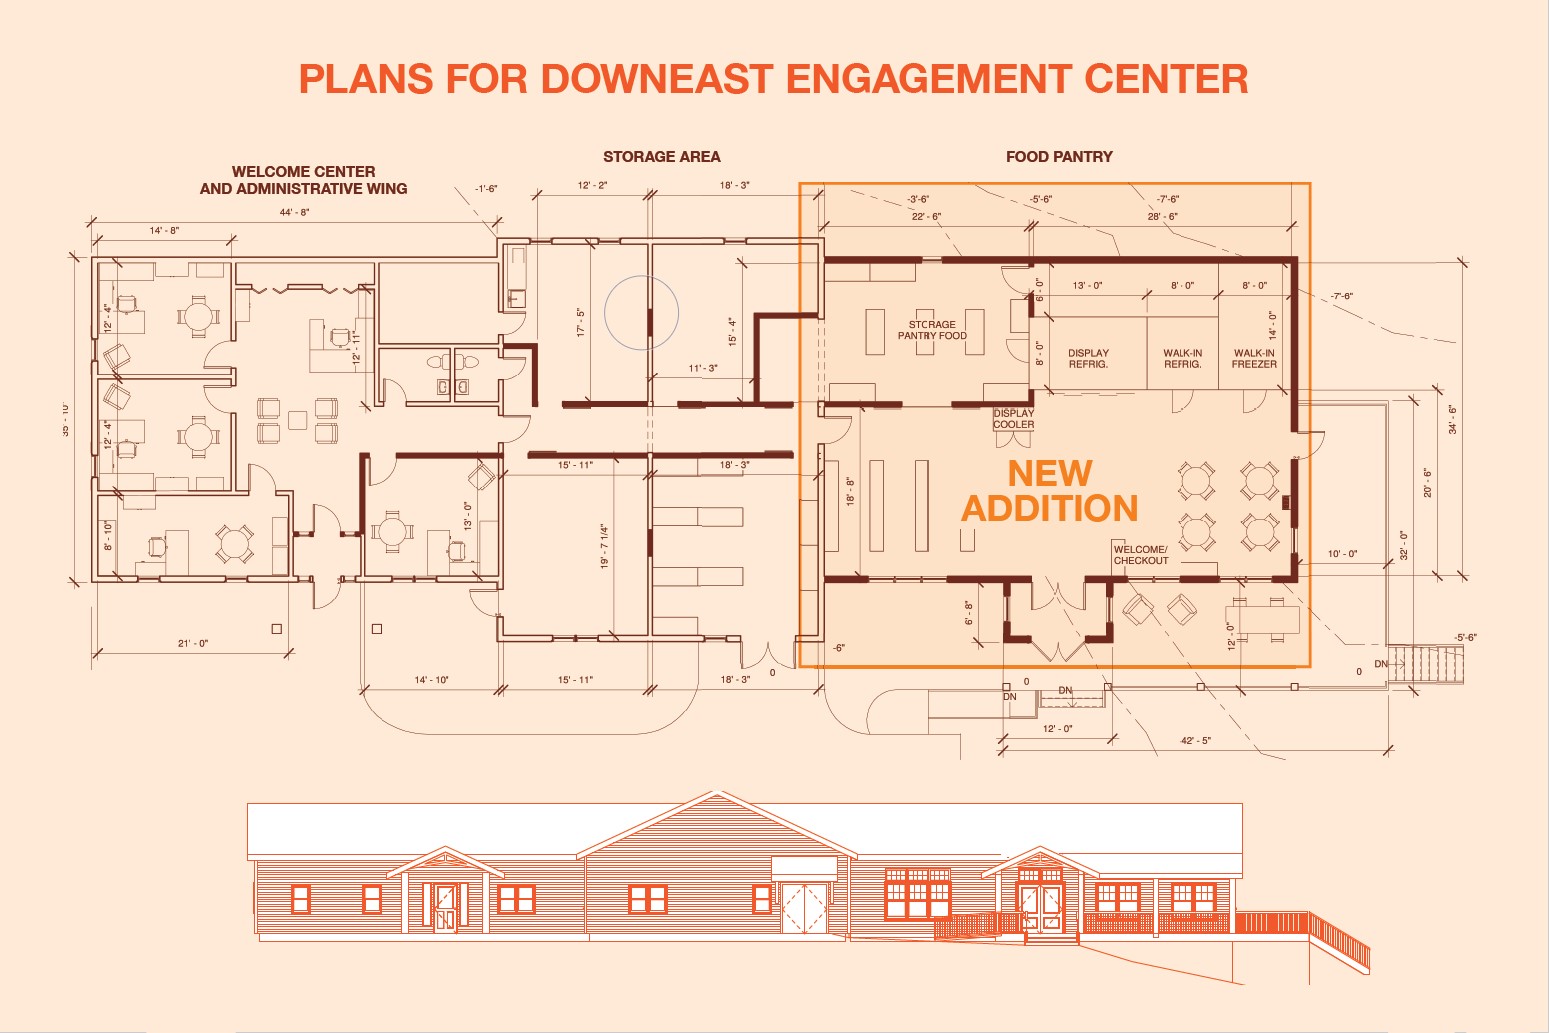 A blueprint of the Mission's Downeast Engagement Center rendered in an orange color. It has three sections on it "Welcome Center and Administrative Wing," "Storage Area," and "Food Pantry." On the food pantry section large text reads "New Addition." At the bottom of the image there is a drawing of what the building will look like from the outside.